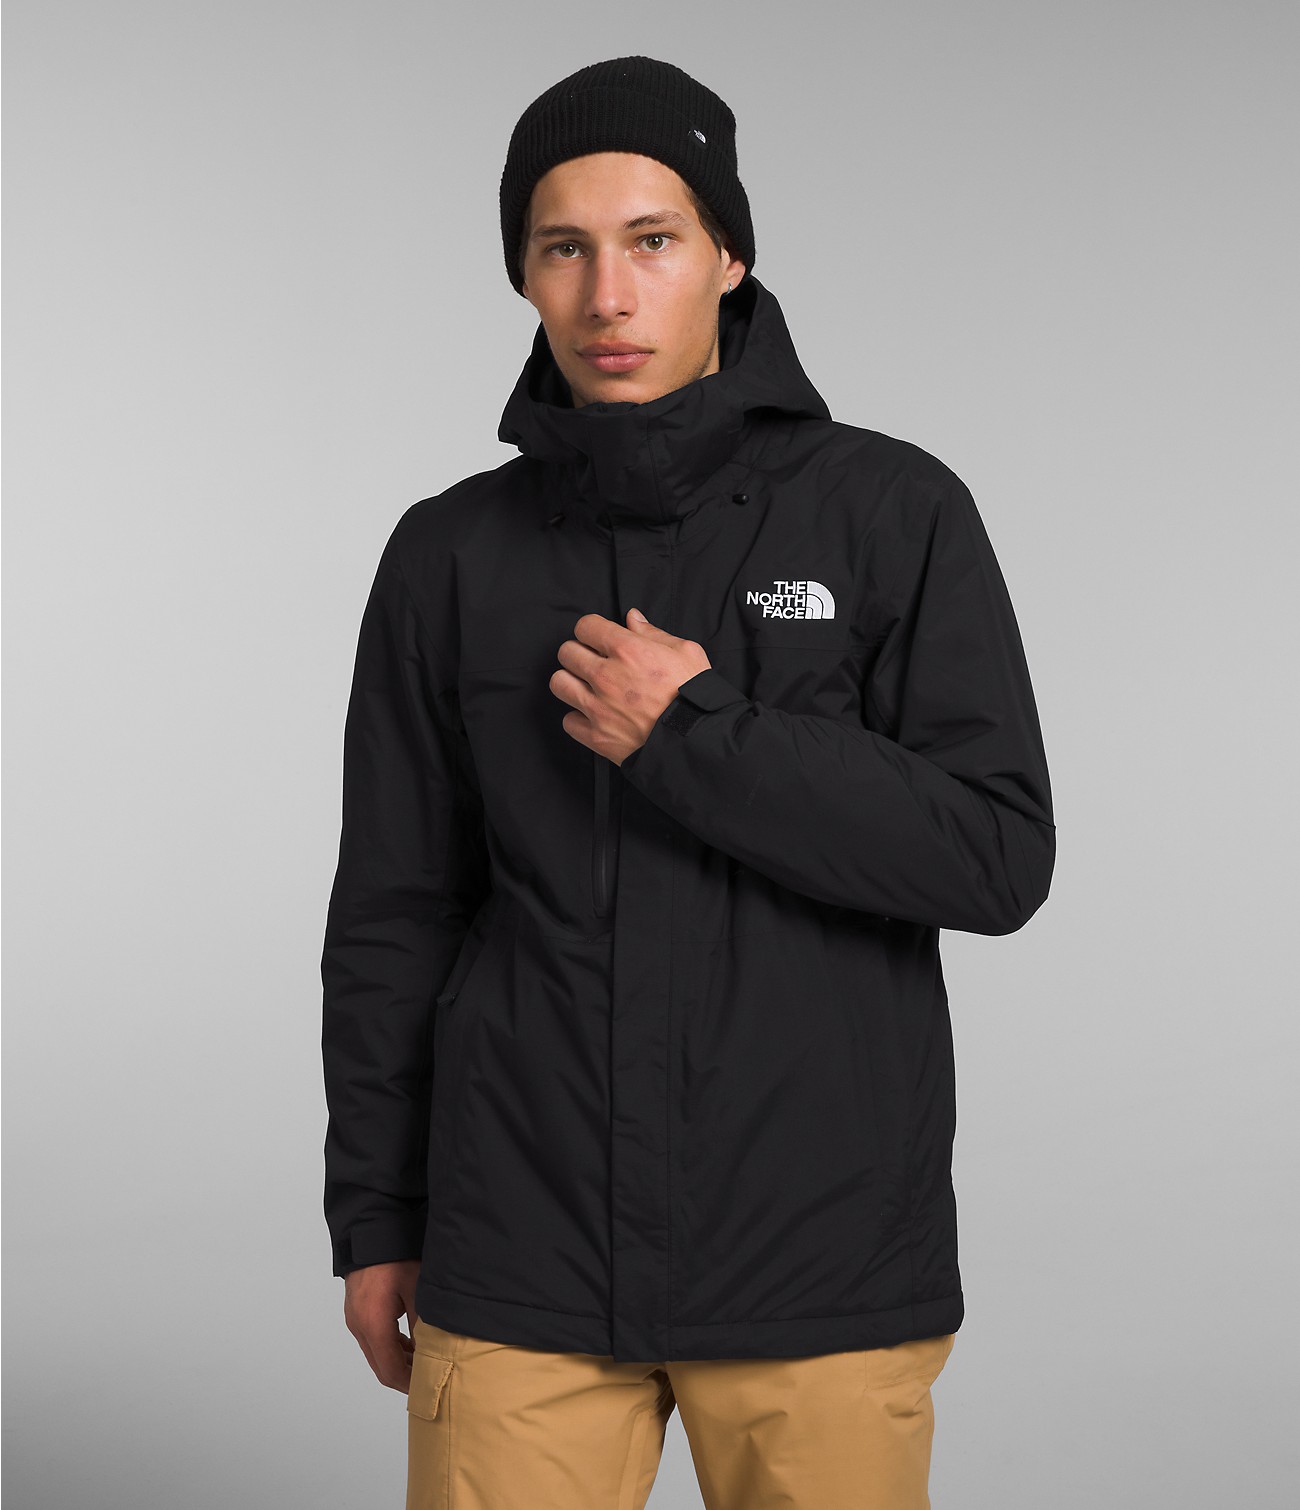 Unlock Wilderness' choice in the Wantdo Vs North Face comparison, the Freedom Insulated Jacket by The North Face